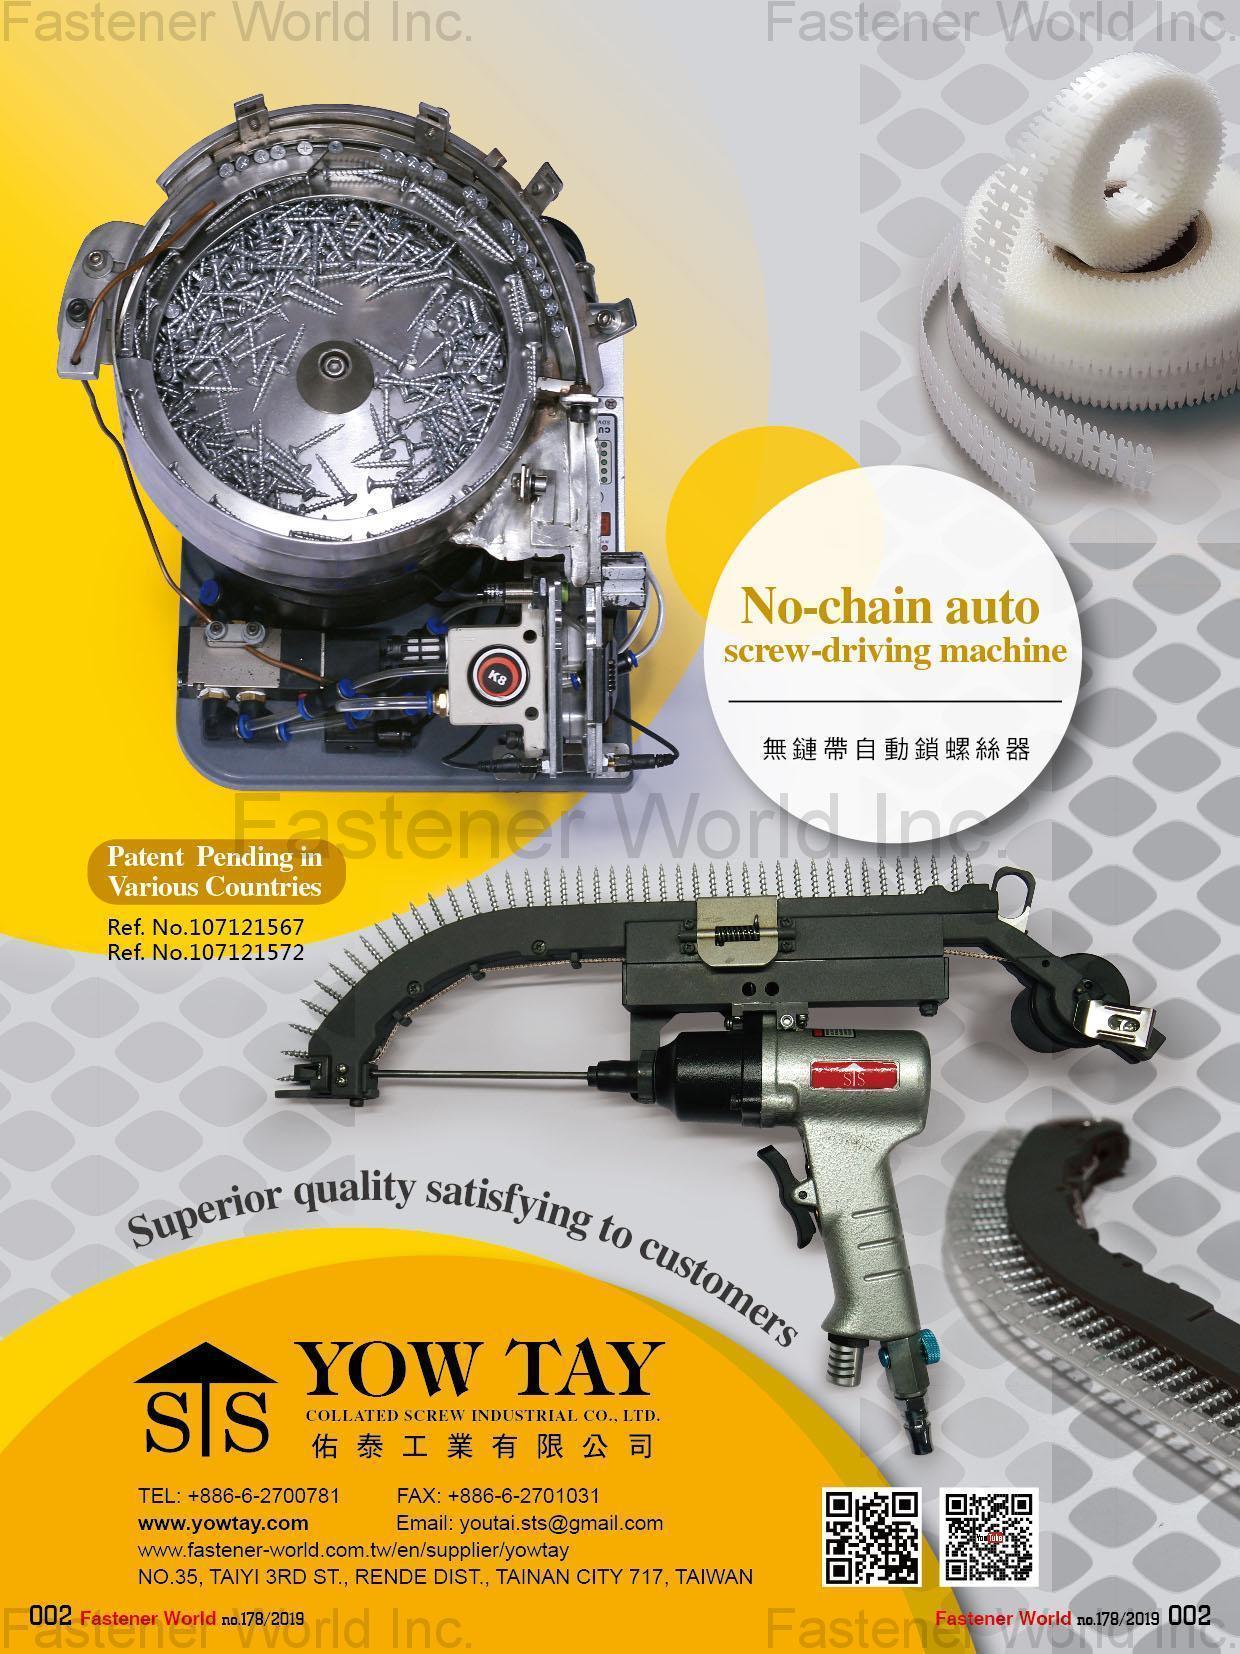 YOW TAY COLLATED SCREW INDUSTRIAL CO., LTD. , No-chain Auto Screw-driving Machine , Pneumatic Hand Tools In General